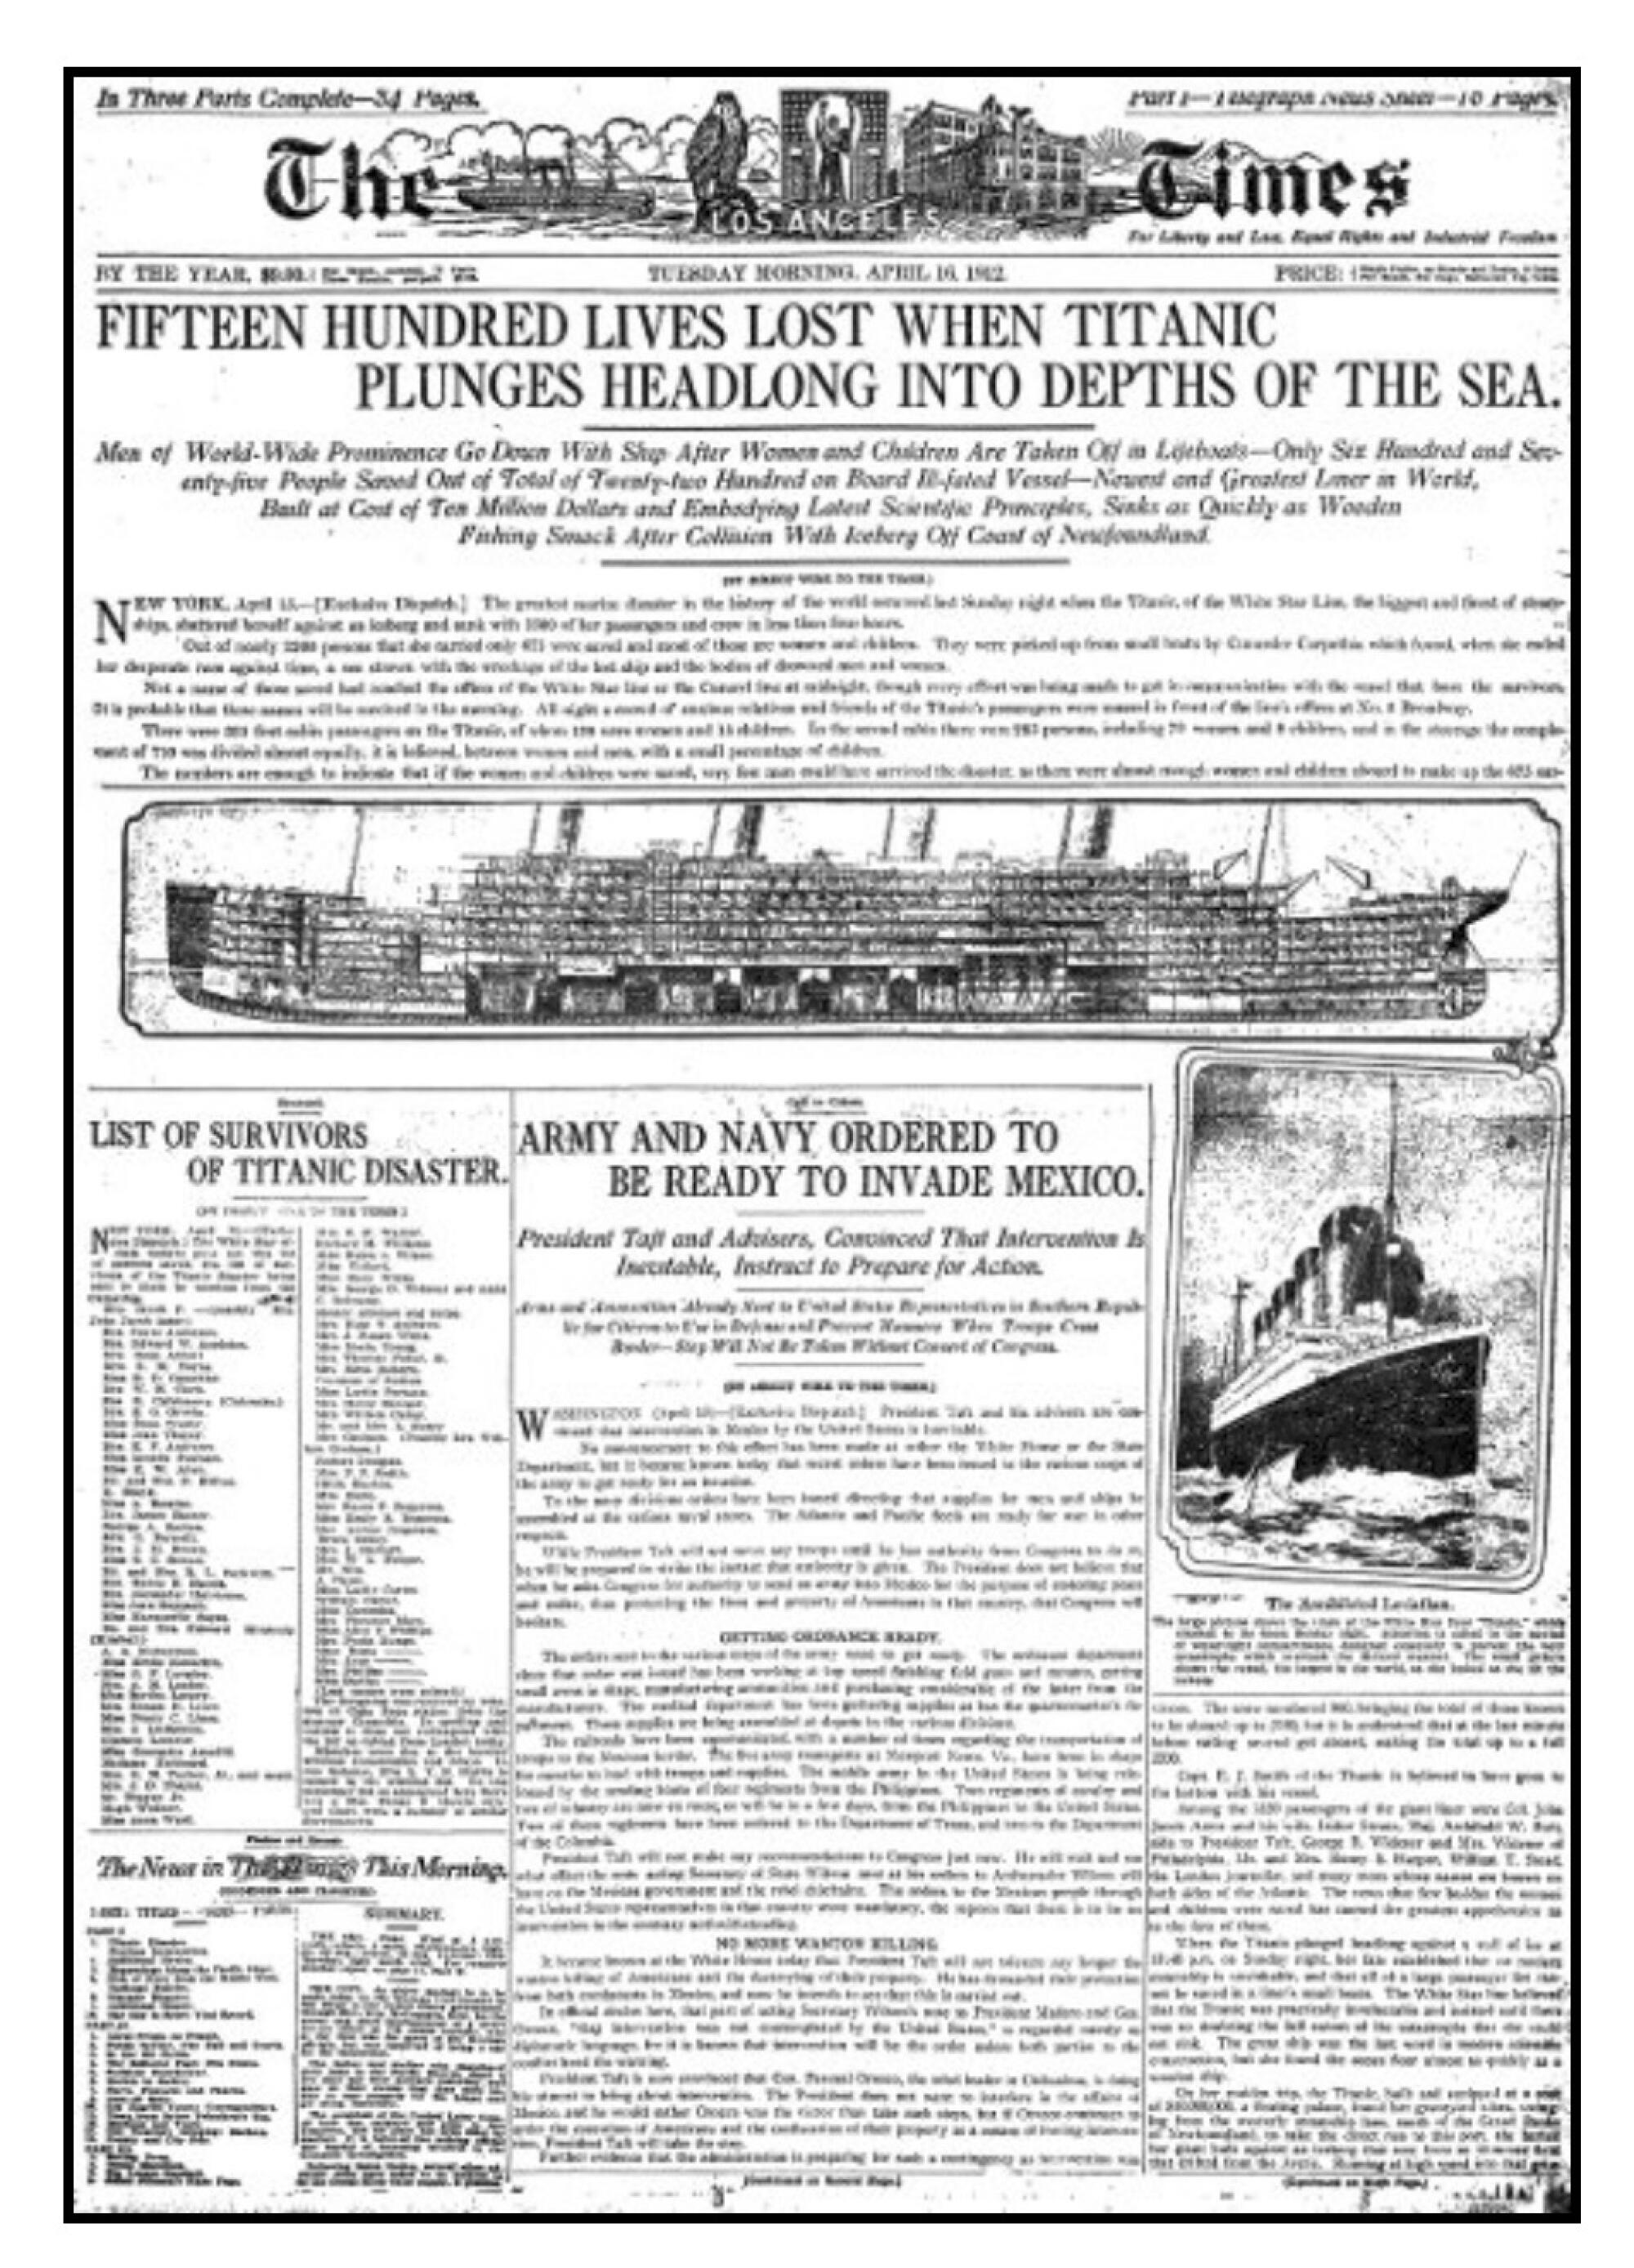 The Los Angeles Times front page on April 16, 1912.